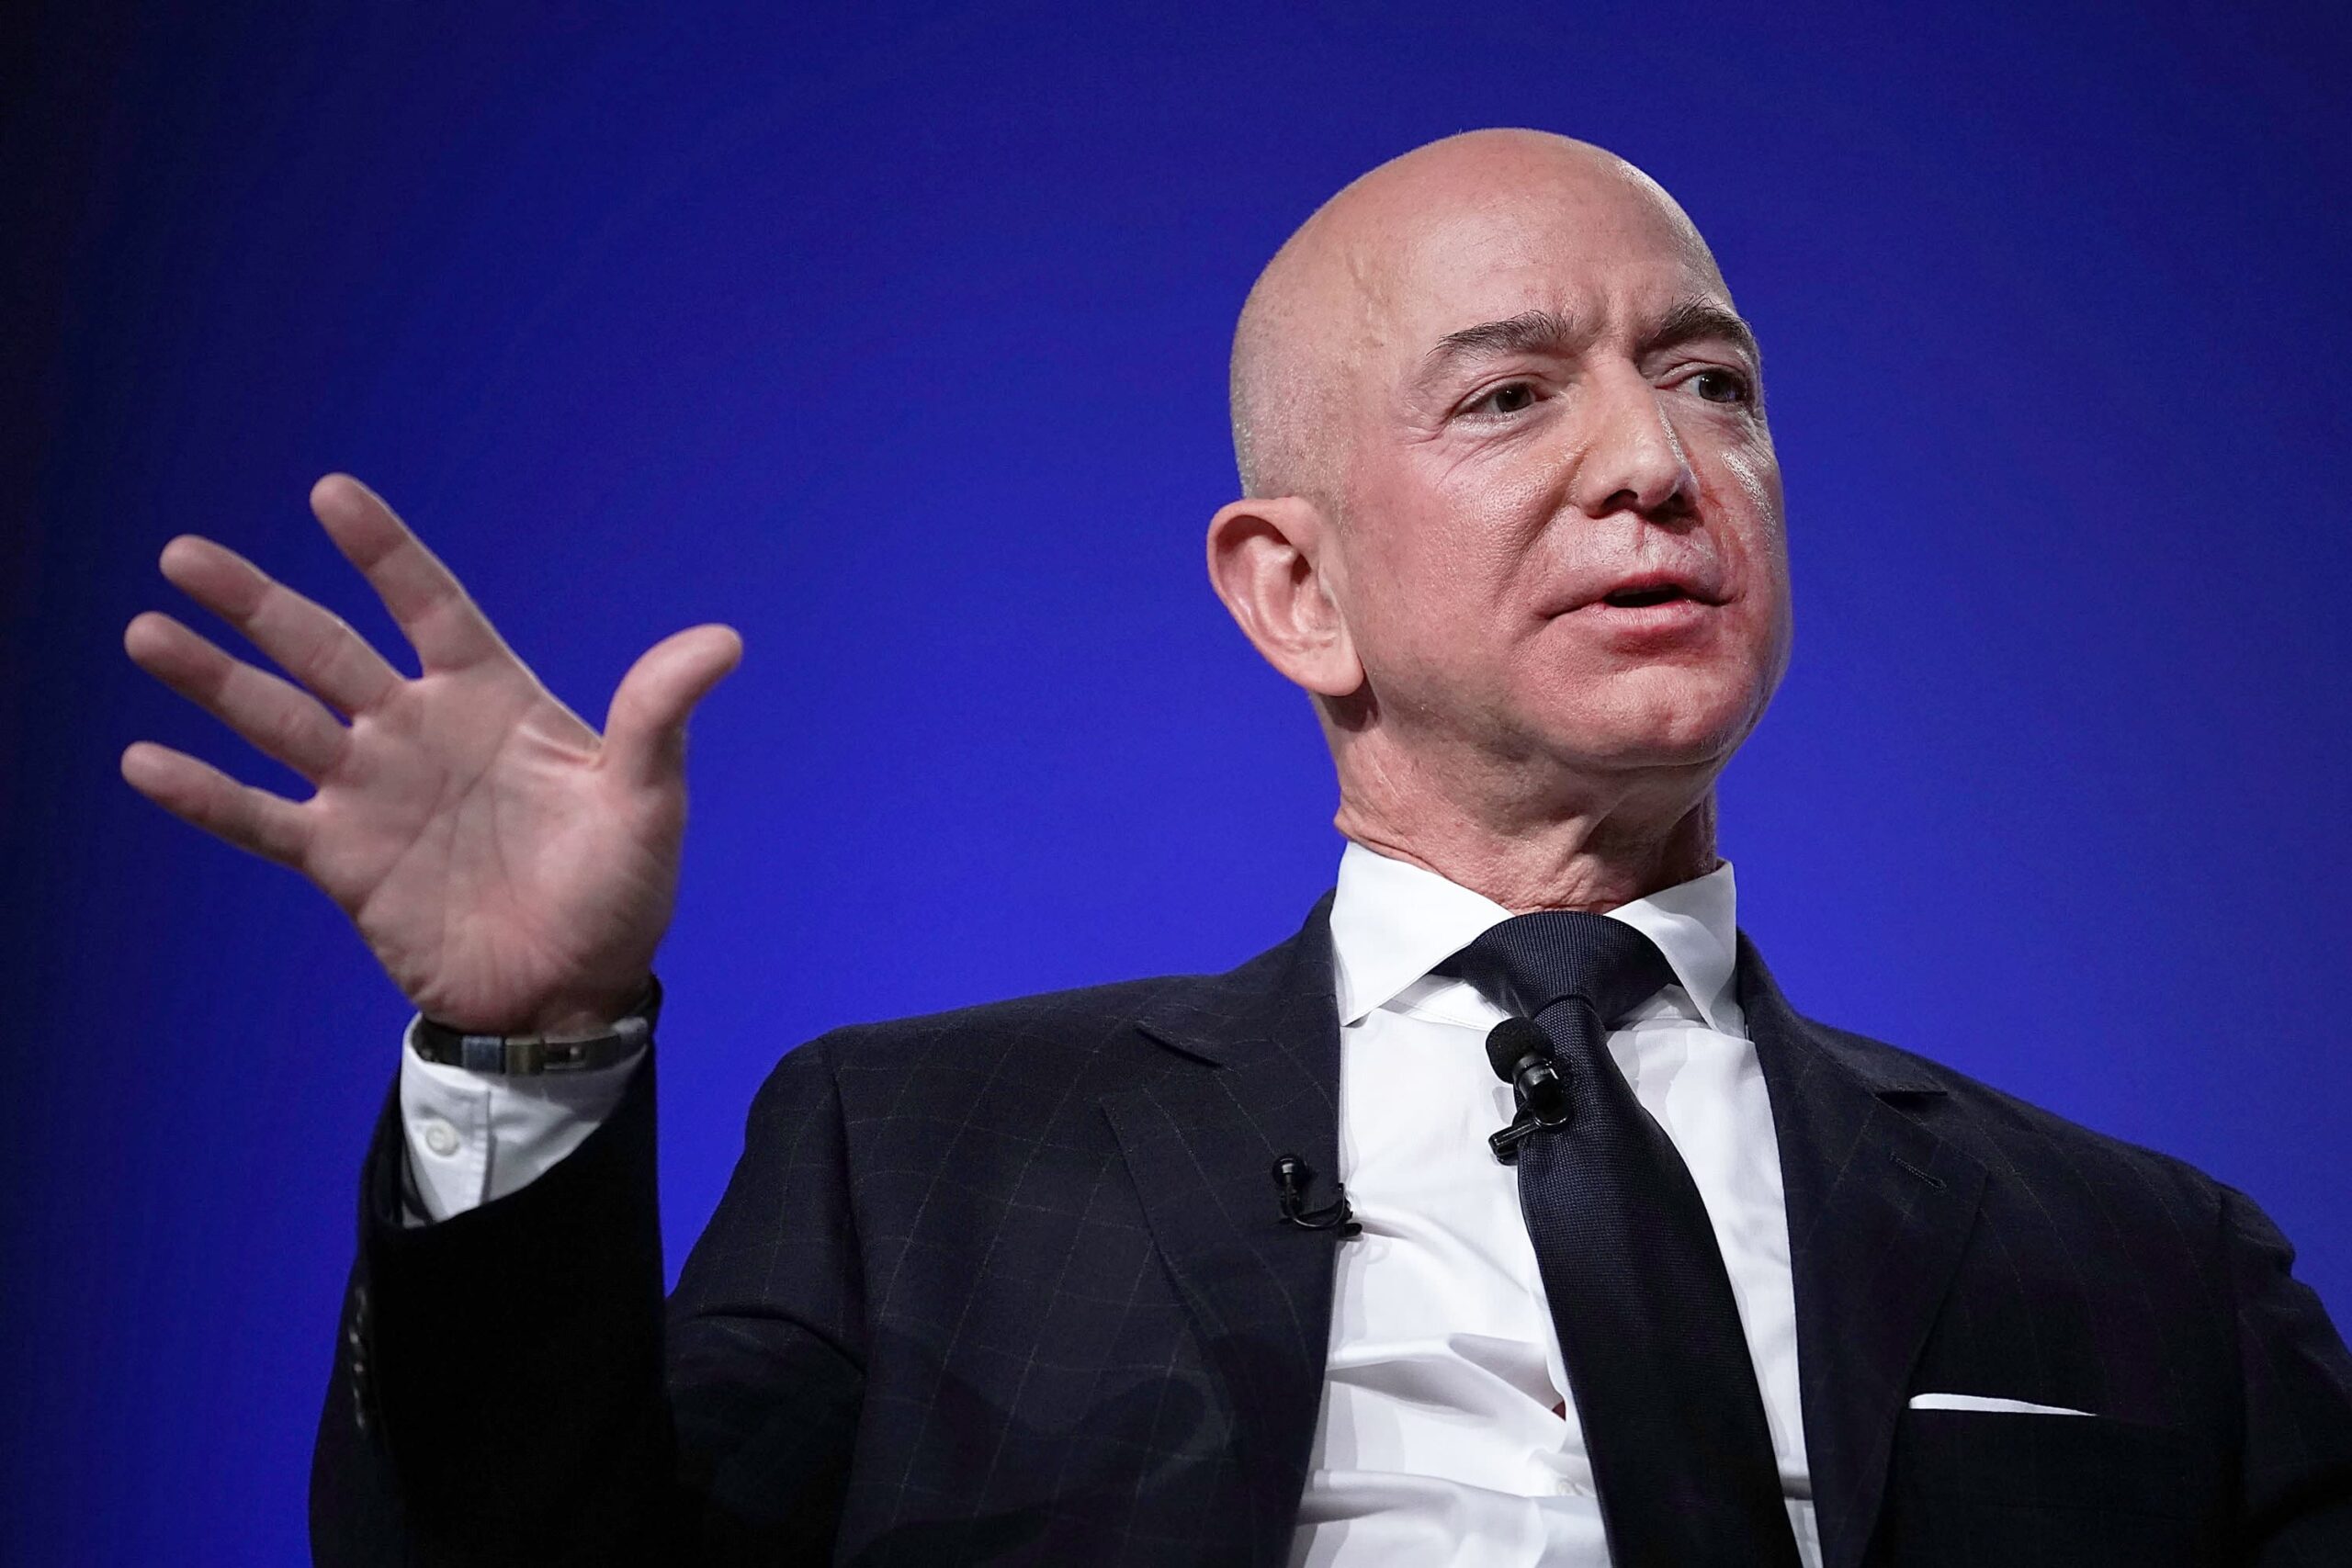 Jeff Bezos to step down as Amazon CEO, Andy Jassy to take over in Q3 ...